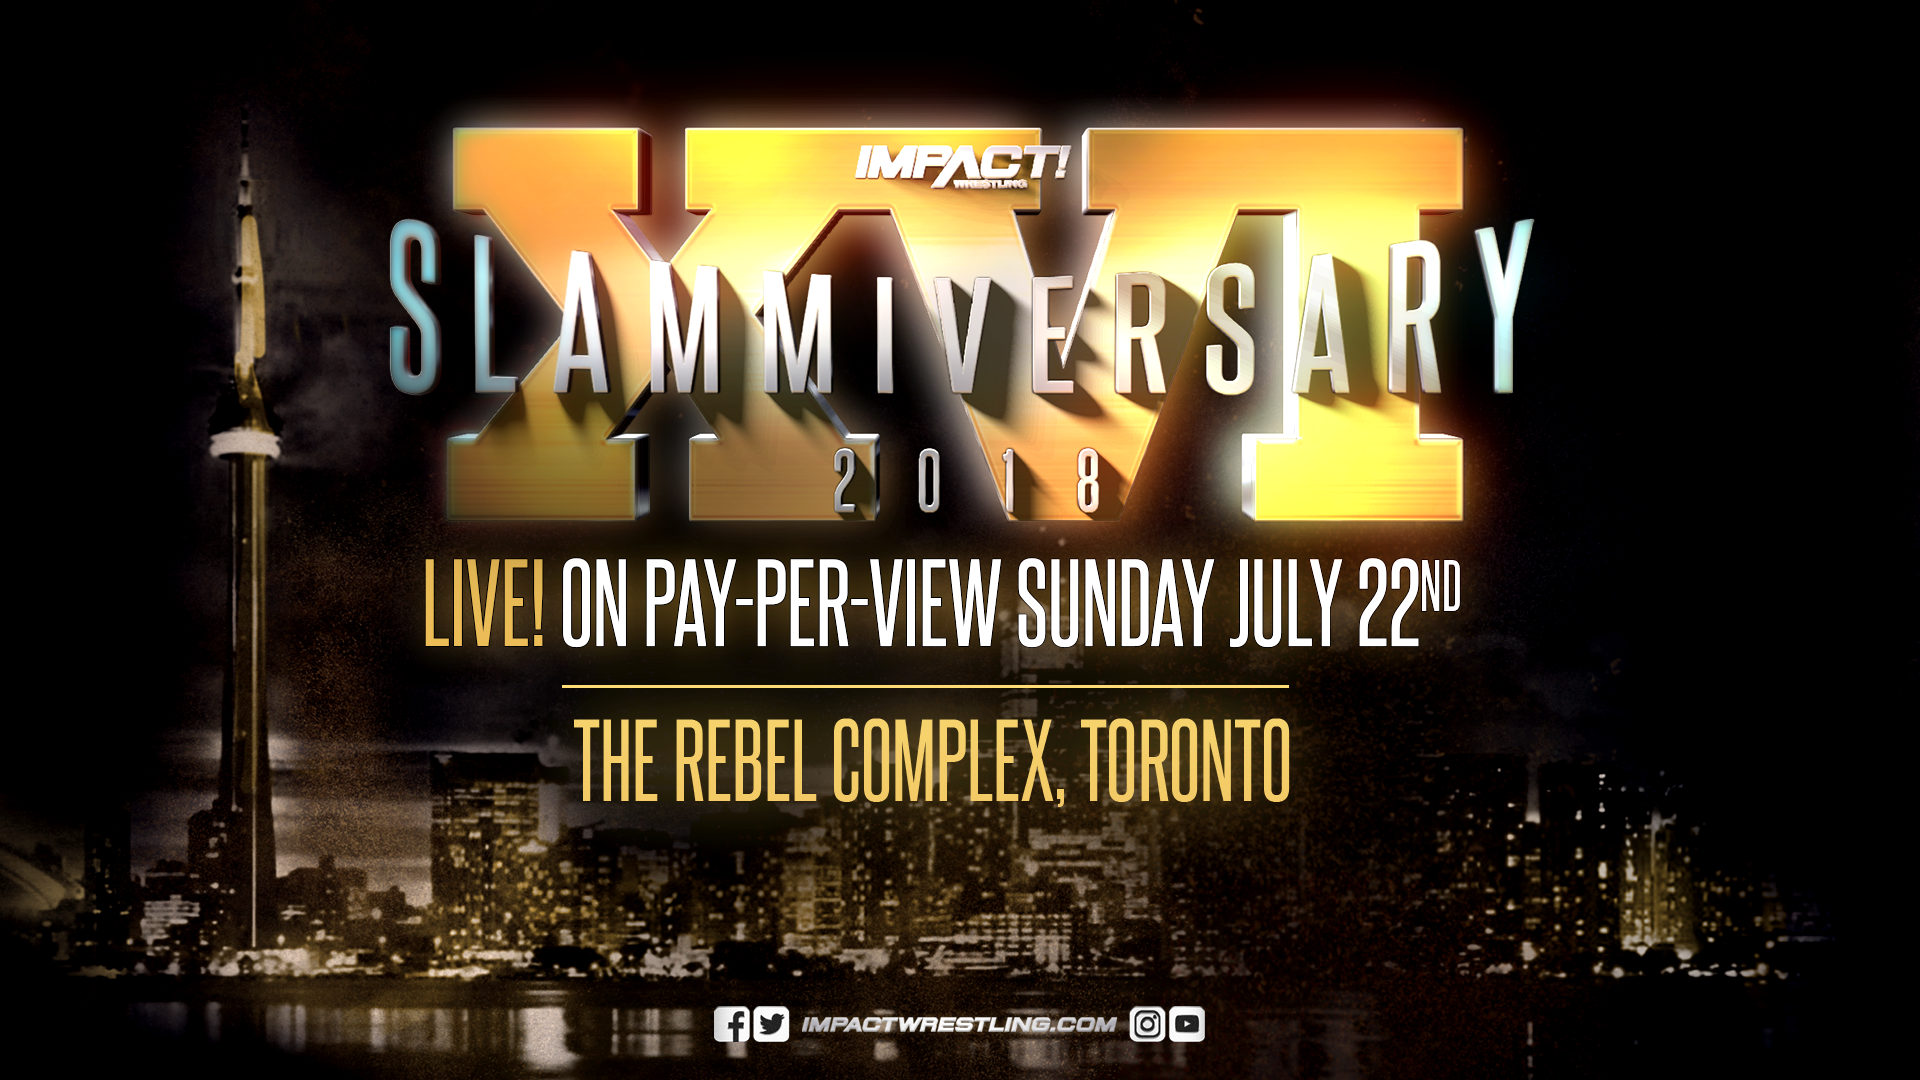 Toronto Blue Jay Curtis Granderson To Serve As “Title Holder” For Slammiversary Main Event